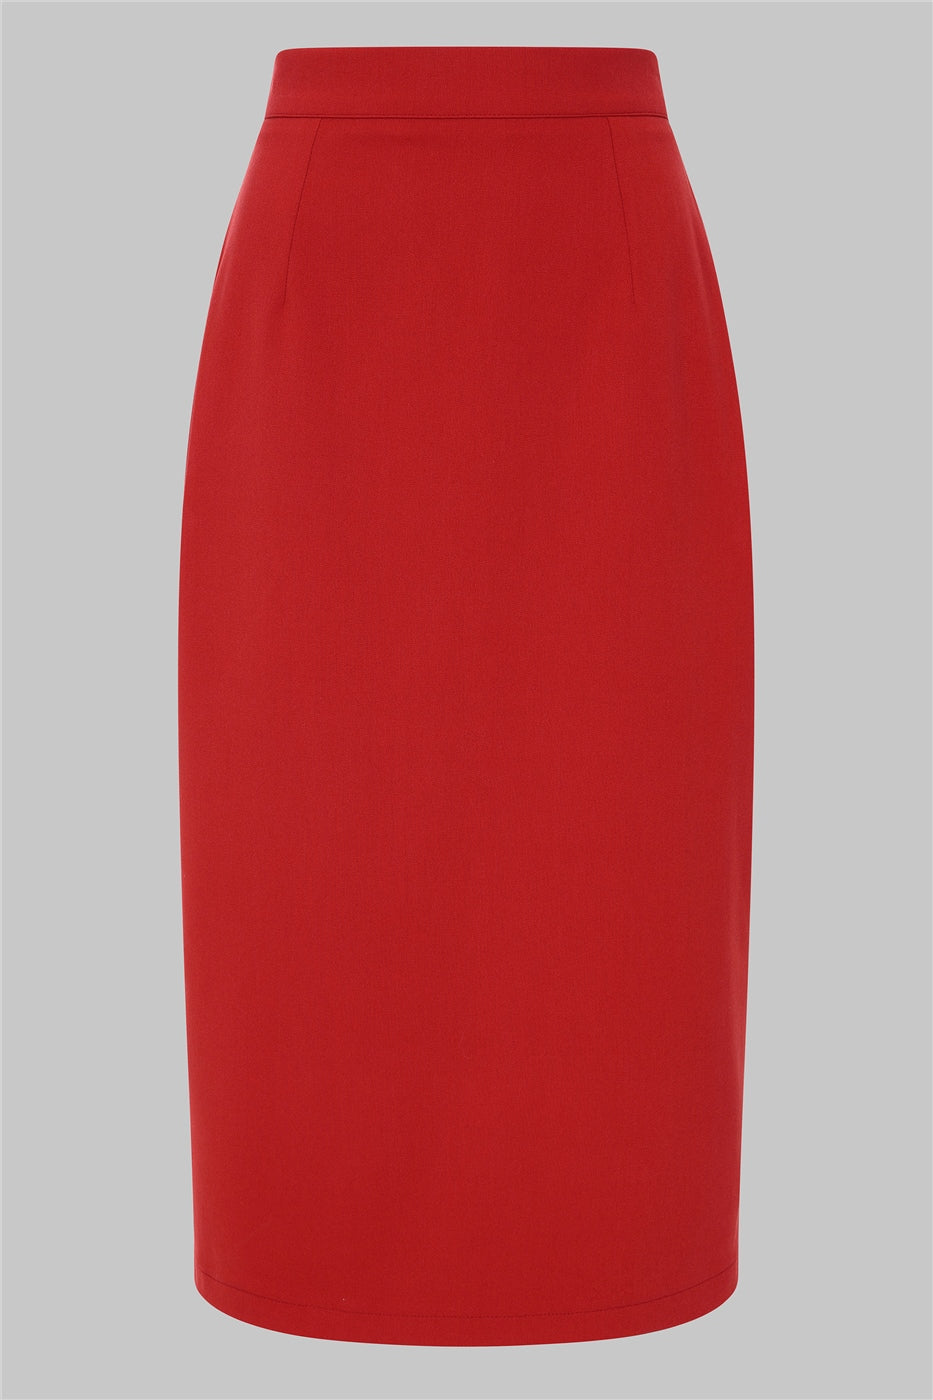 Red Posey pencil skirt by Collectif